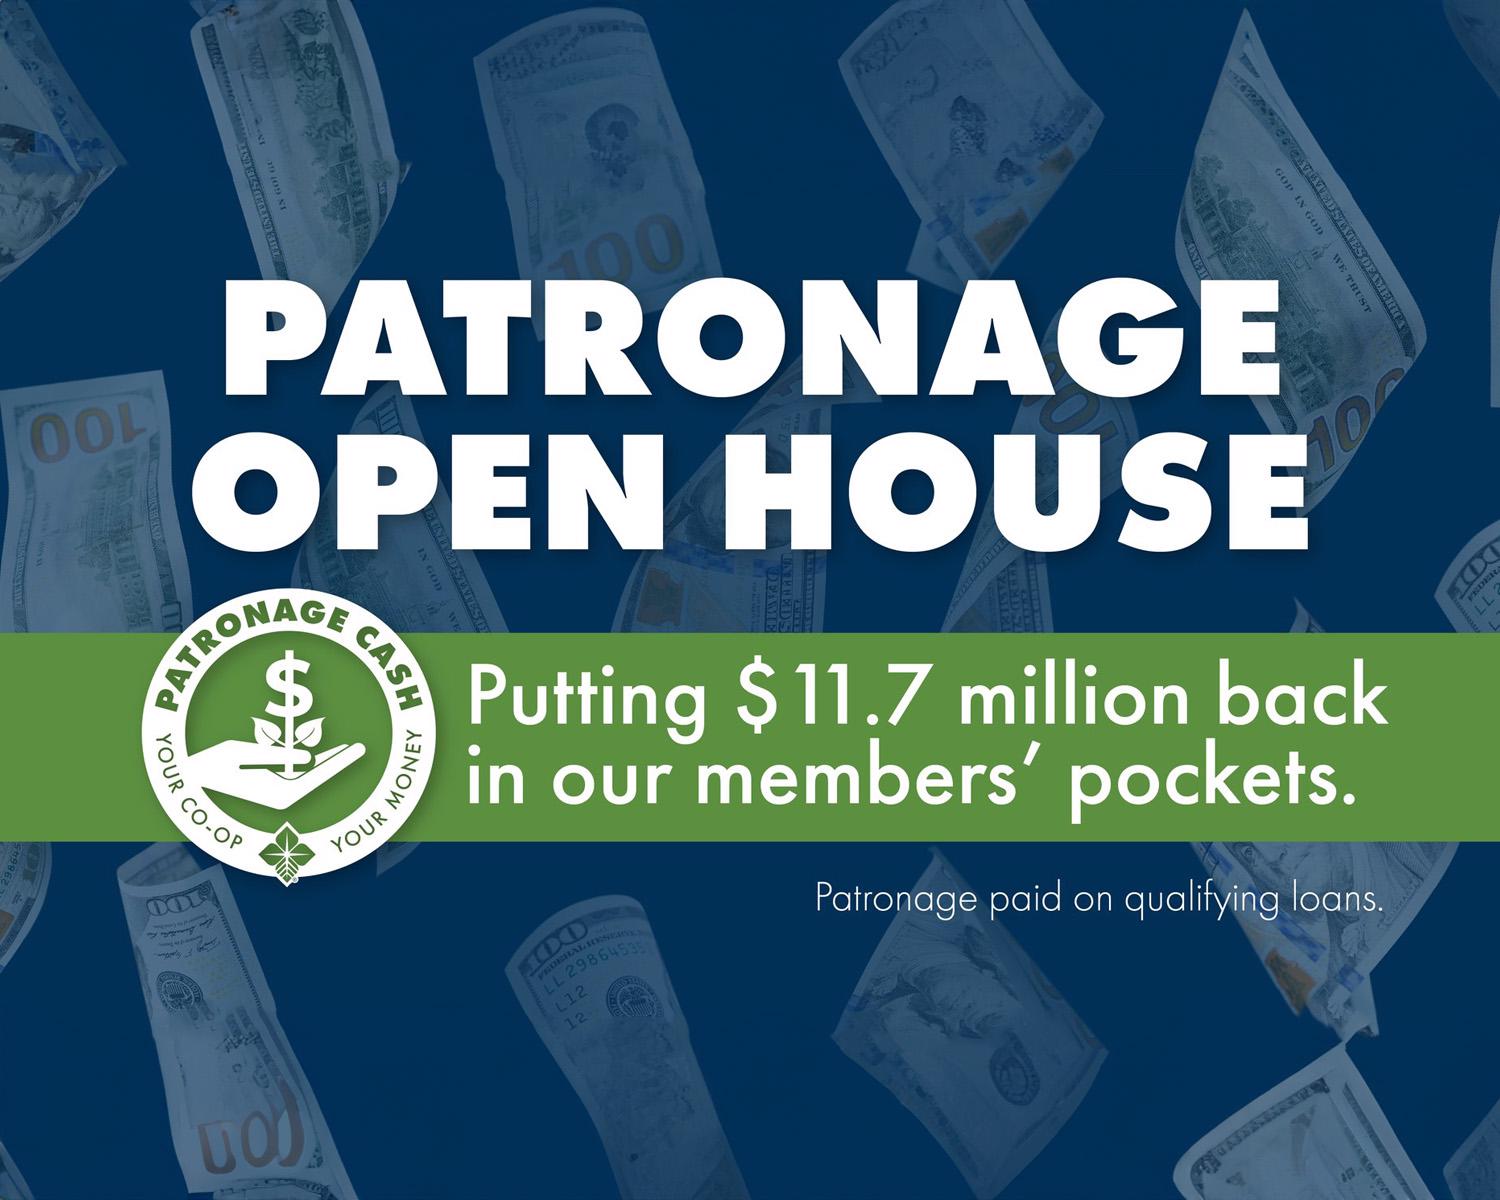 Patronage open House Putting $11.7 million back in our members' pockets